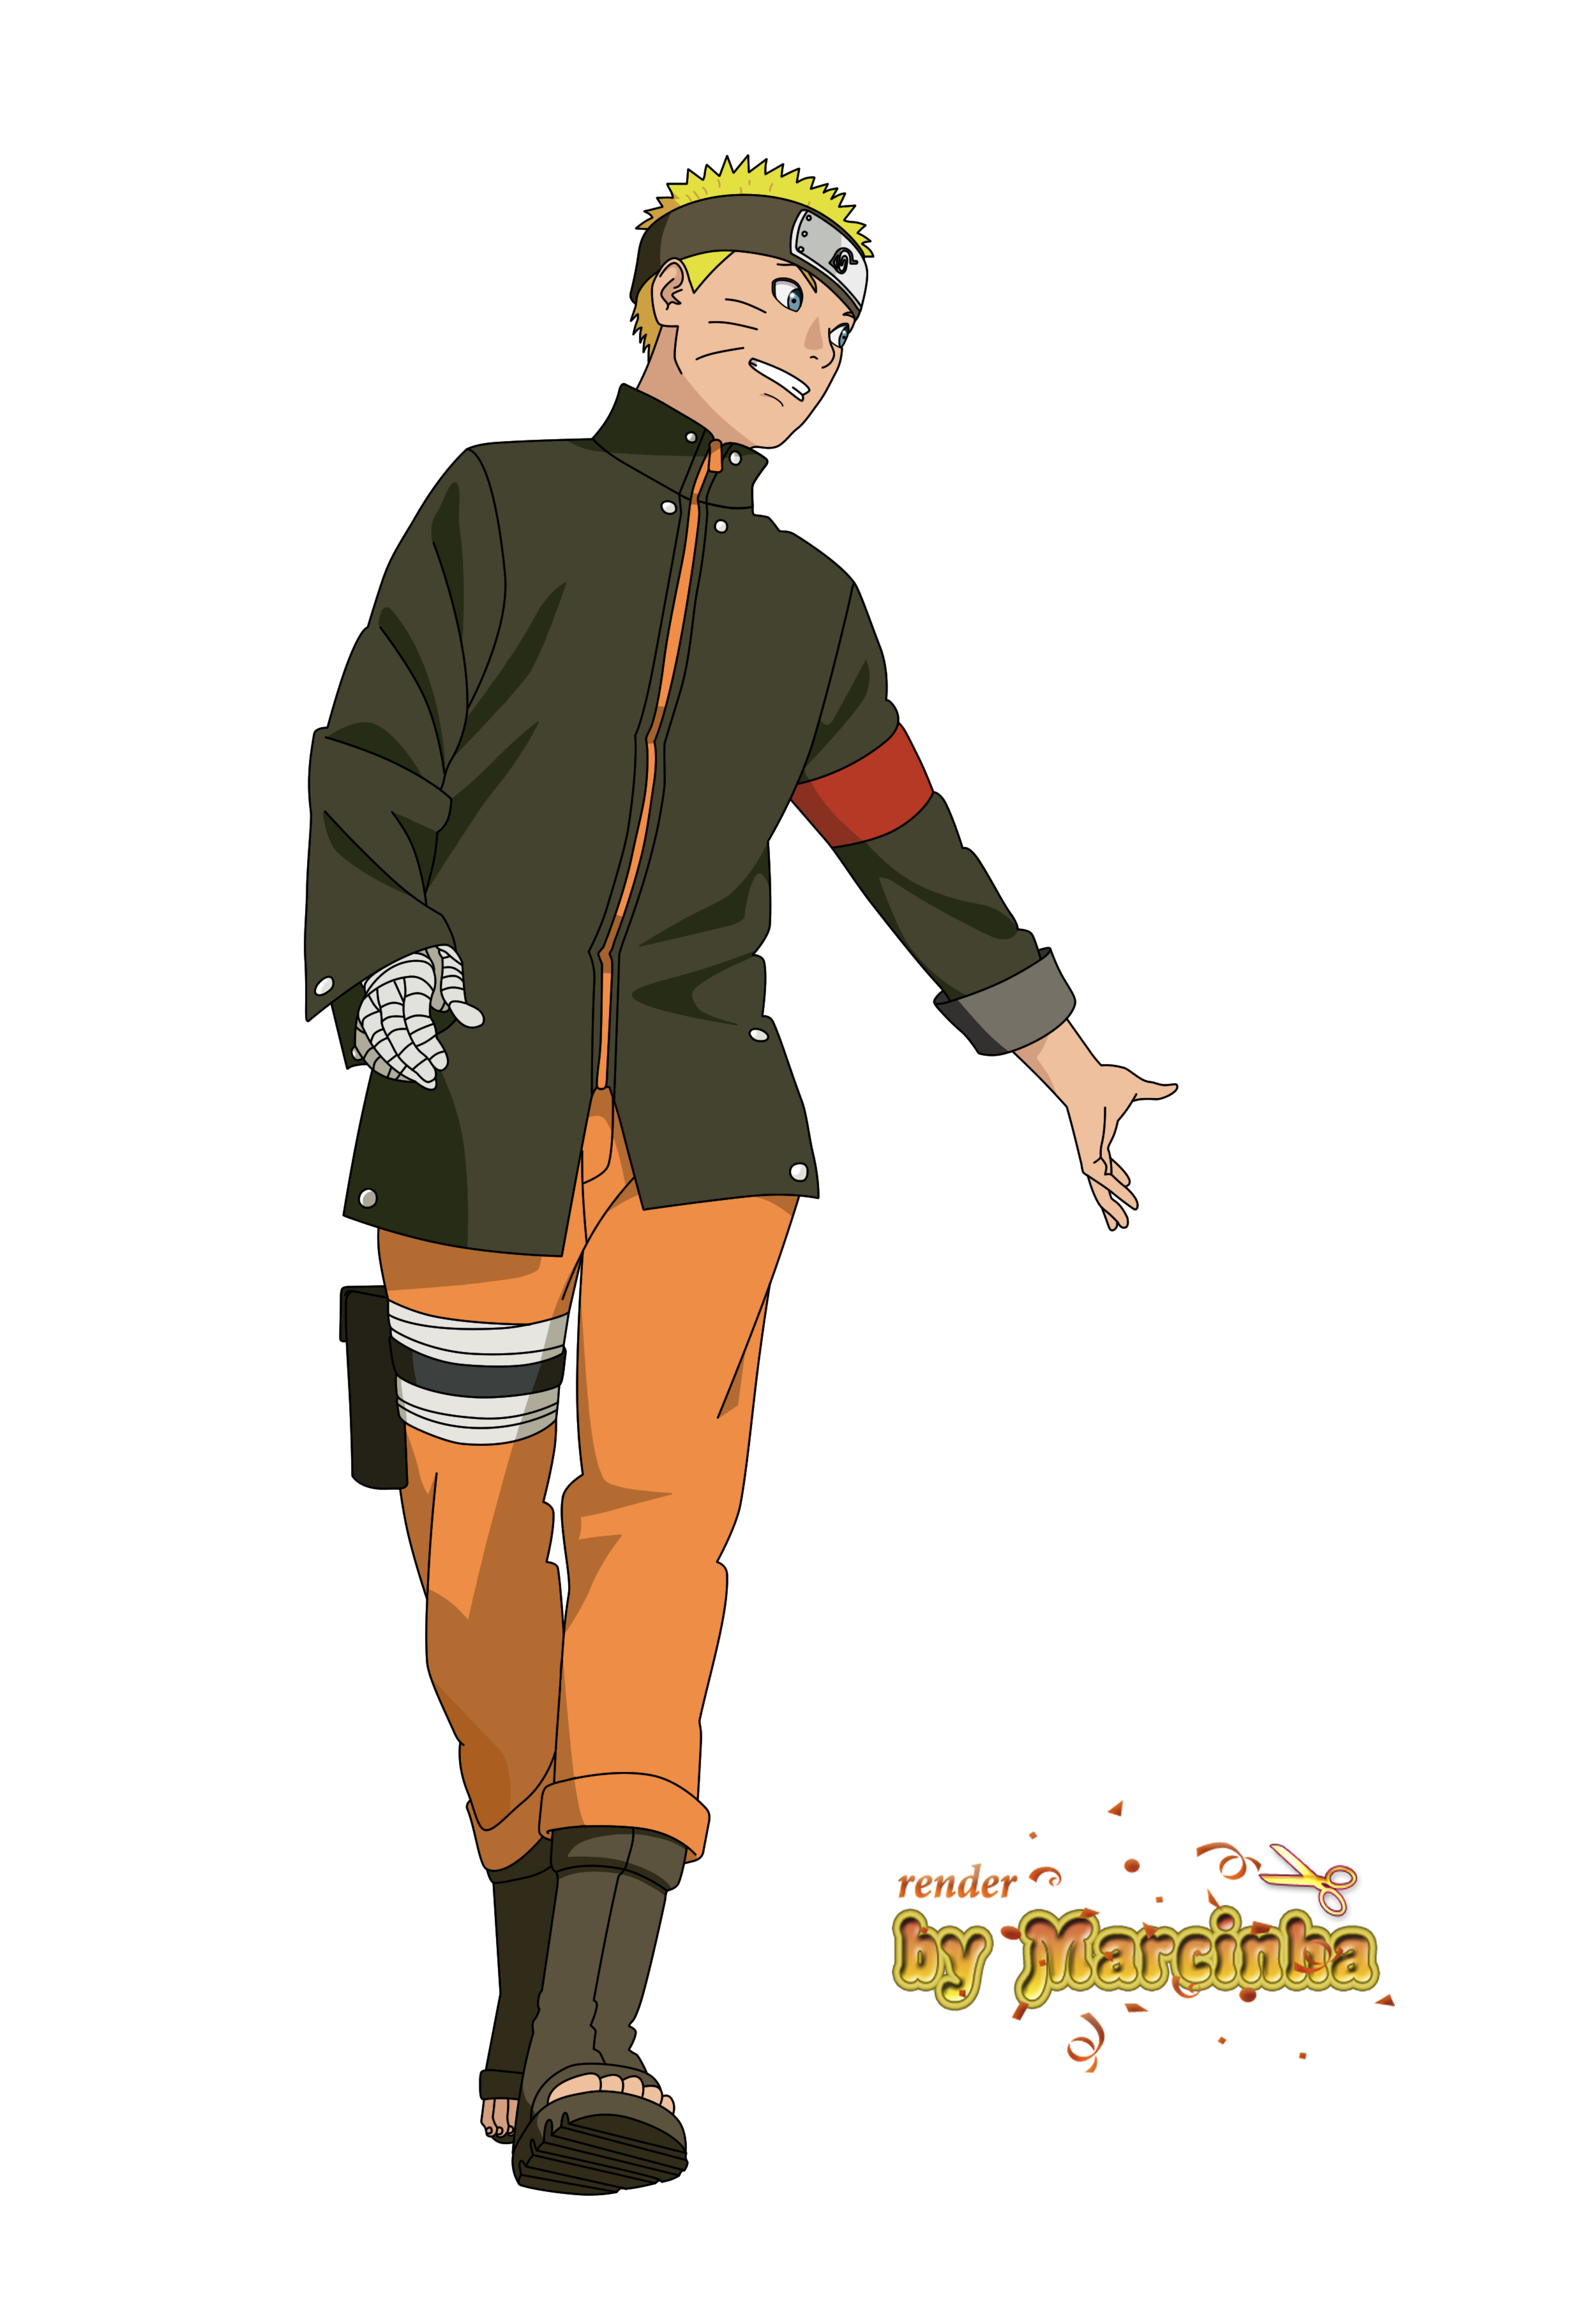 Naruto The Last by Marcinha20 on DeviantArt